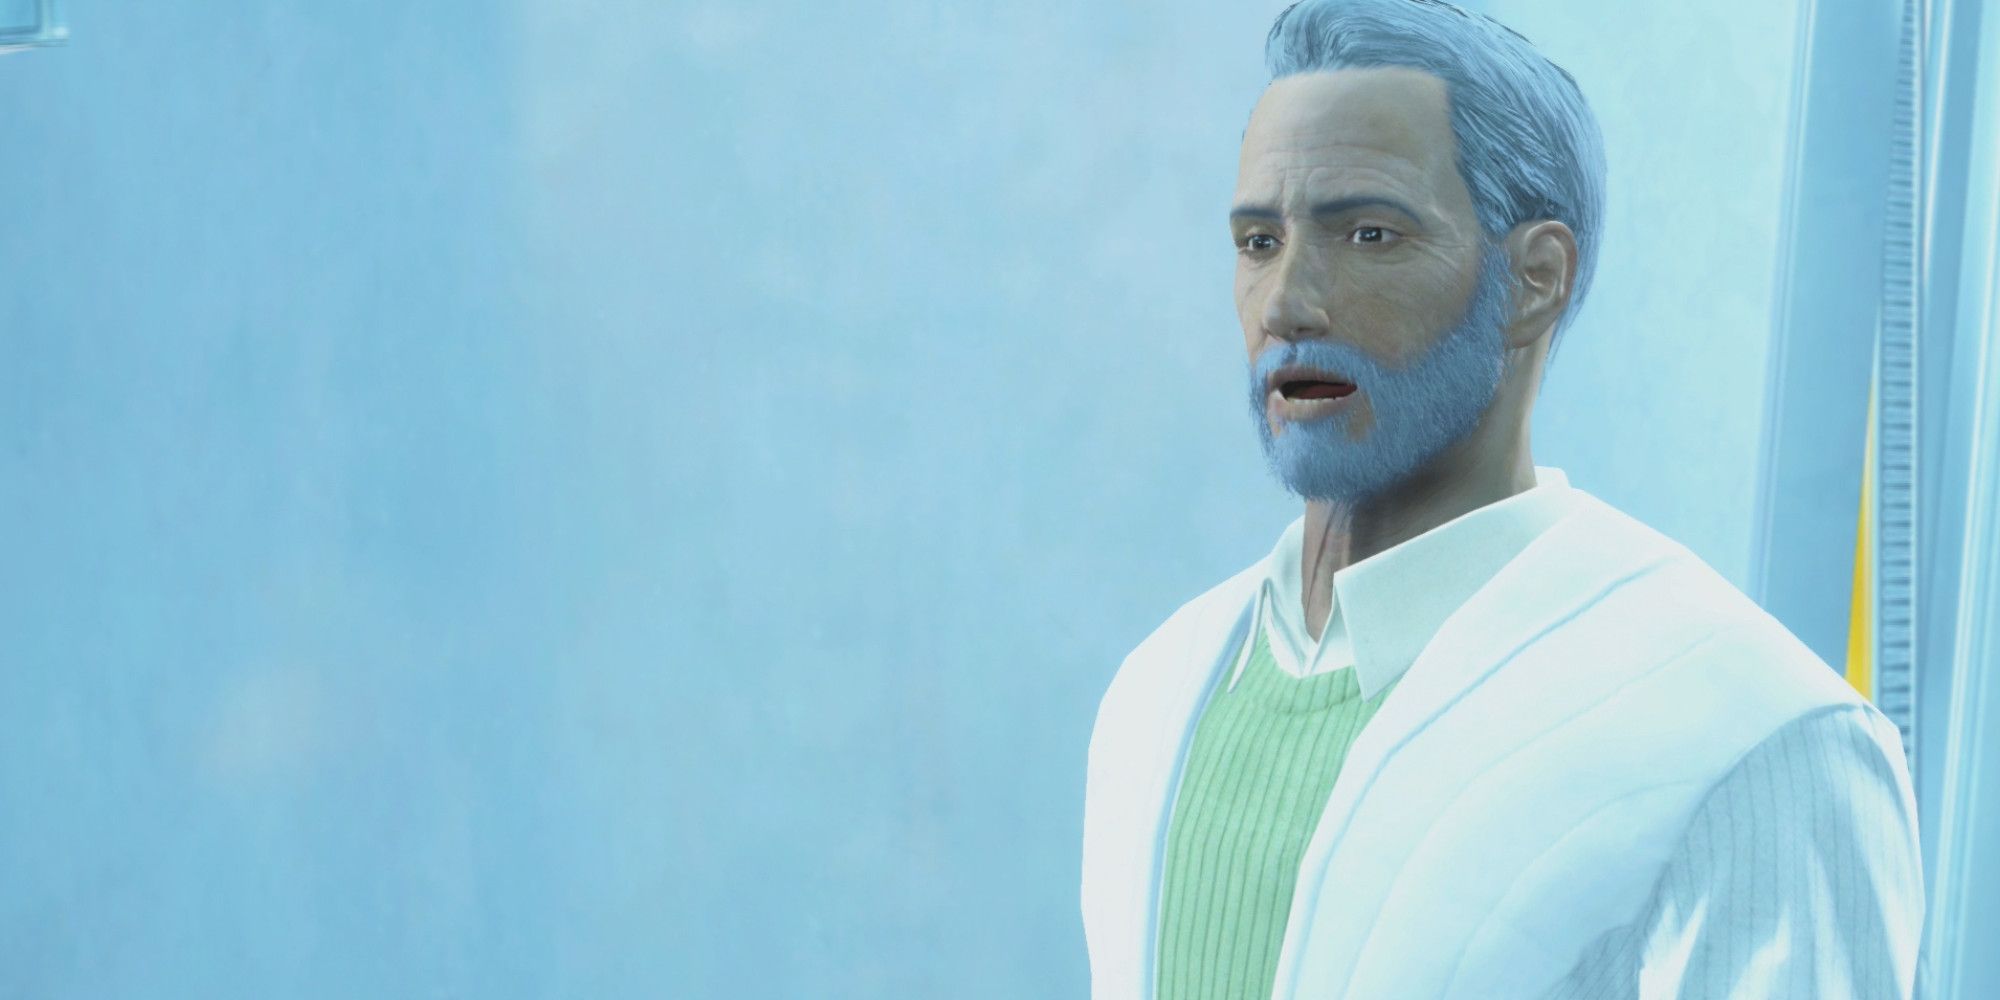 Shaun in Fallout 4, otherwise known as 'Father'